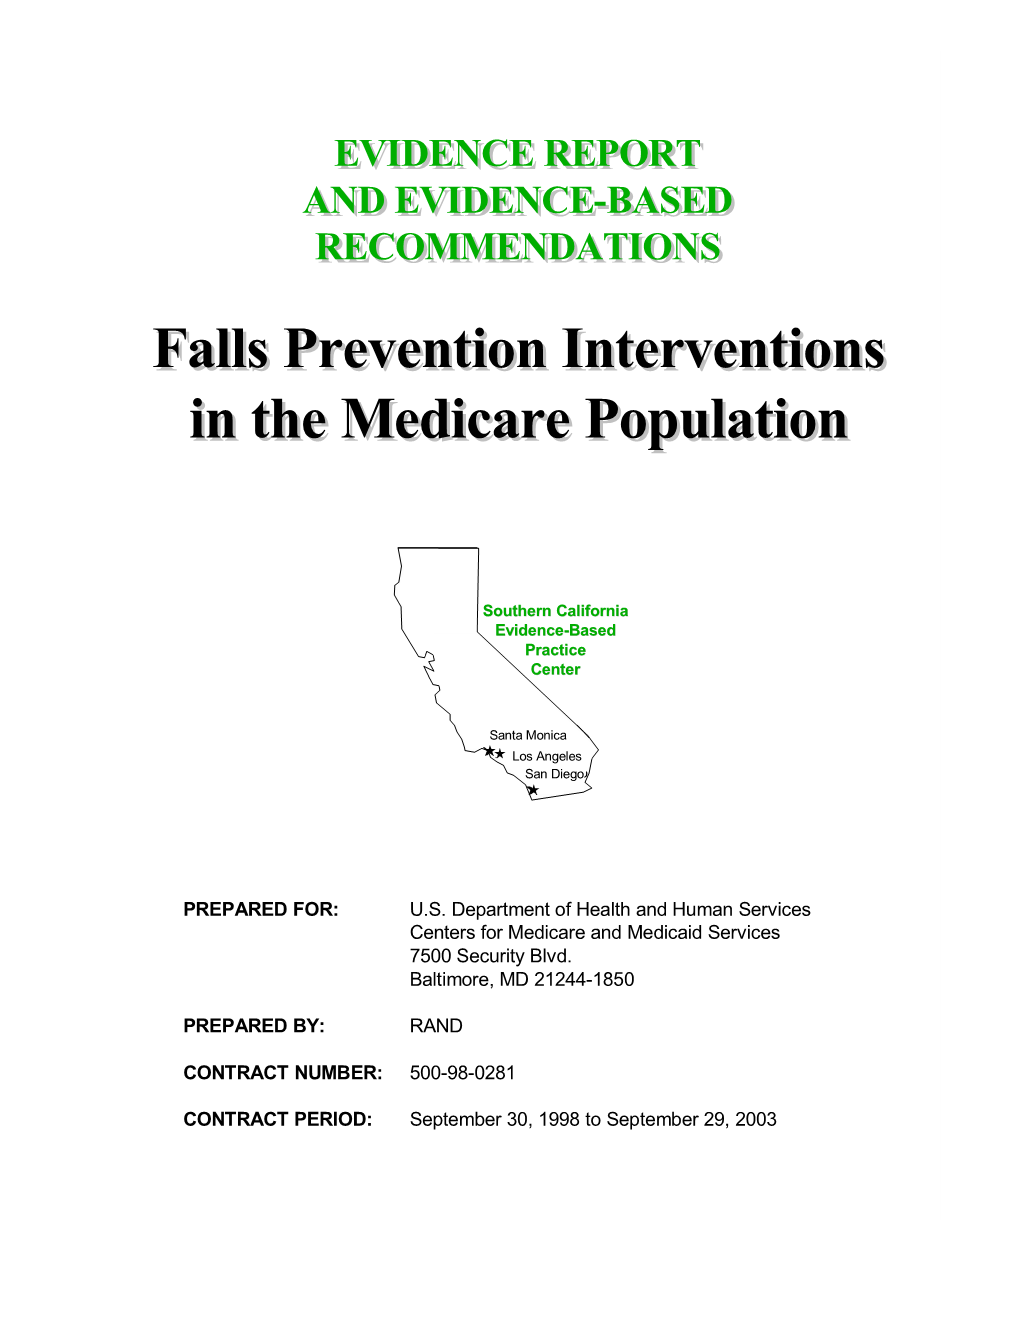 Falls Prevention Interventions in the Medicare Population